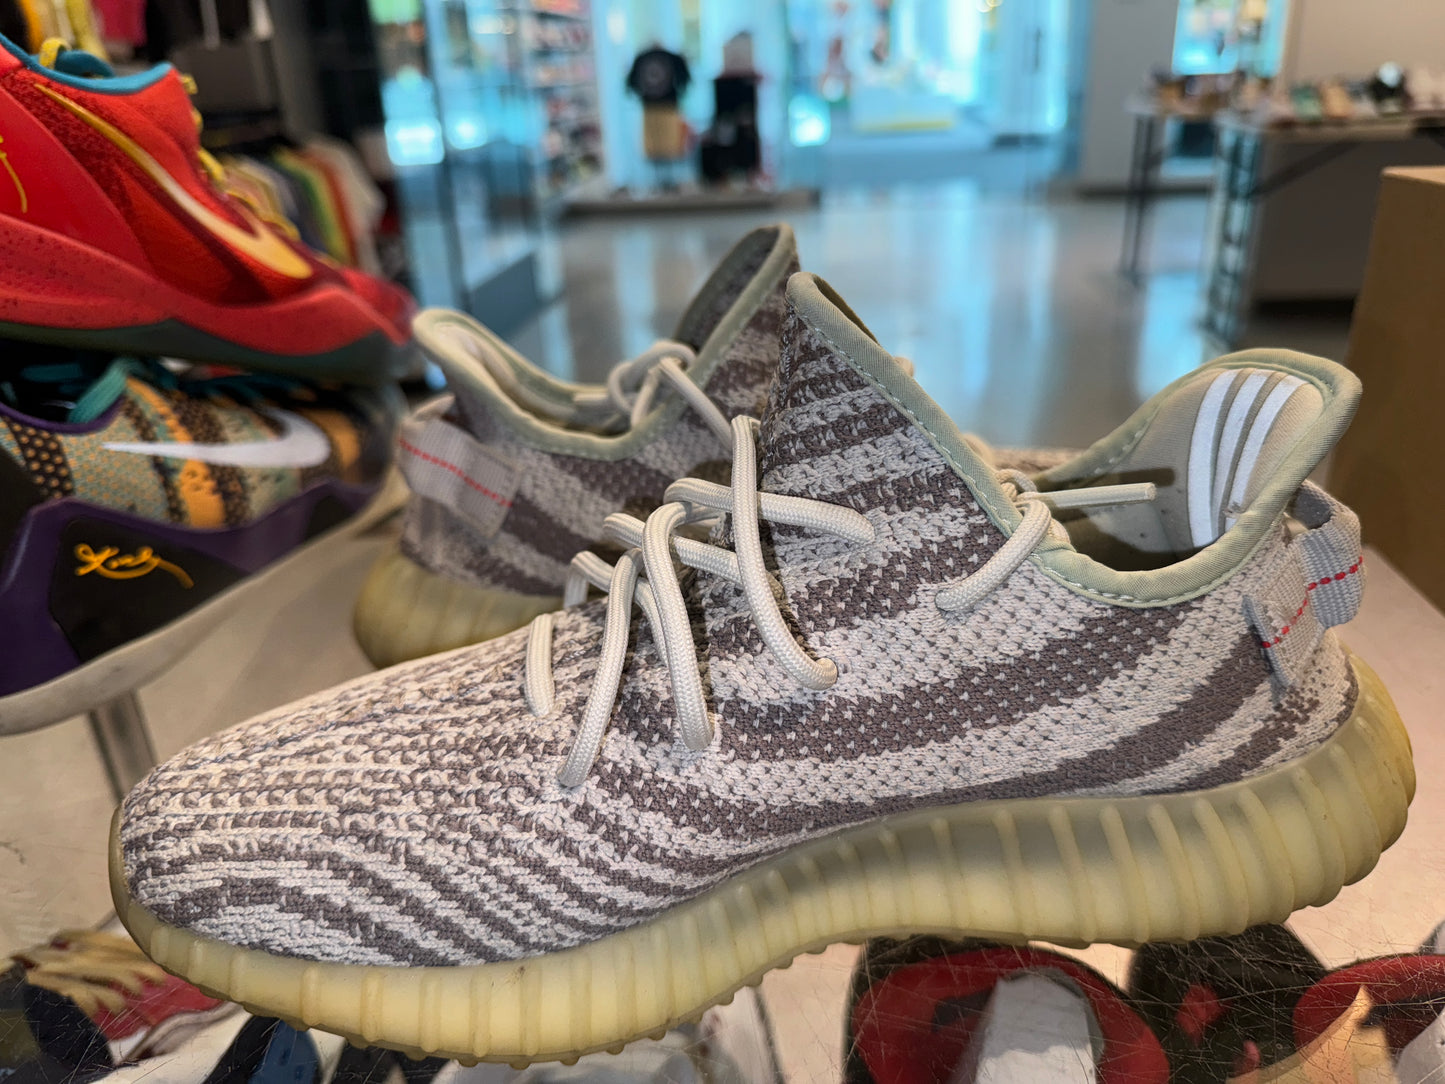 Size 9 Adidas Yeezy Boost 350 v2 “Blue Tint” (Mall)